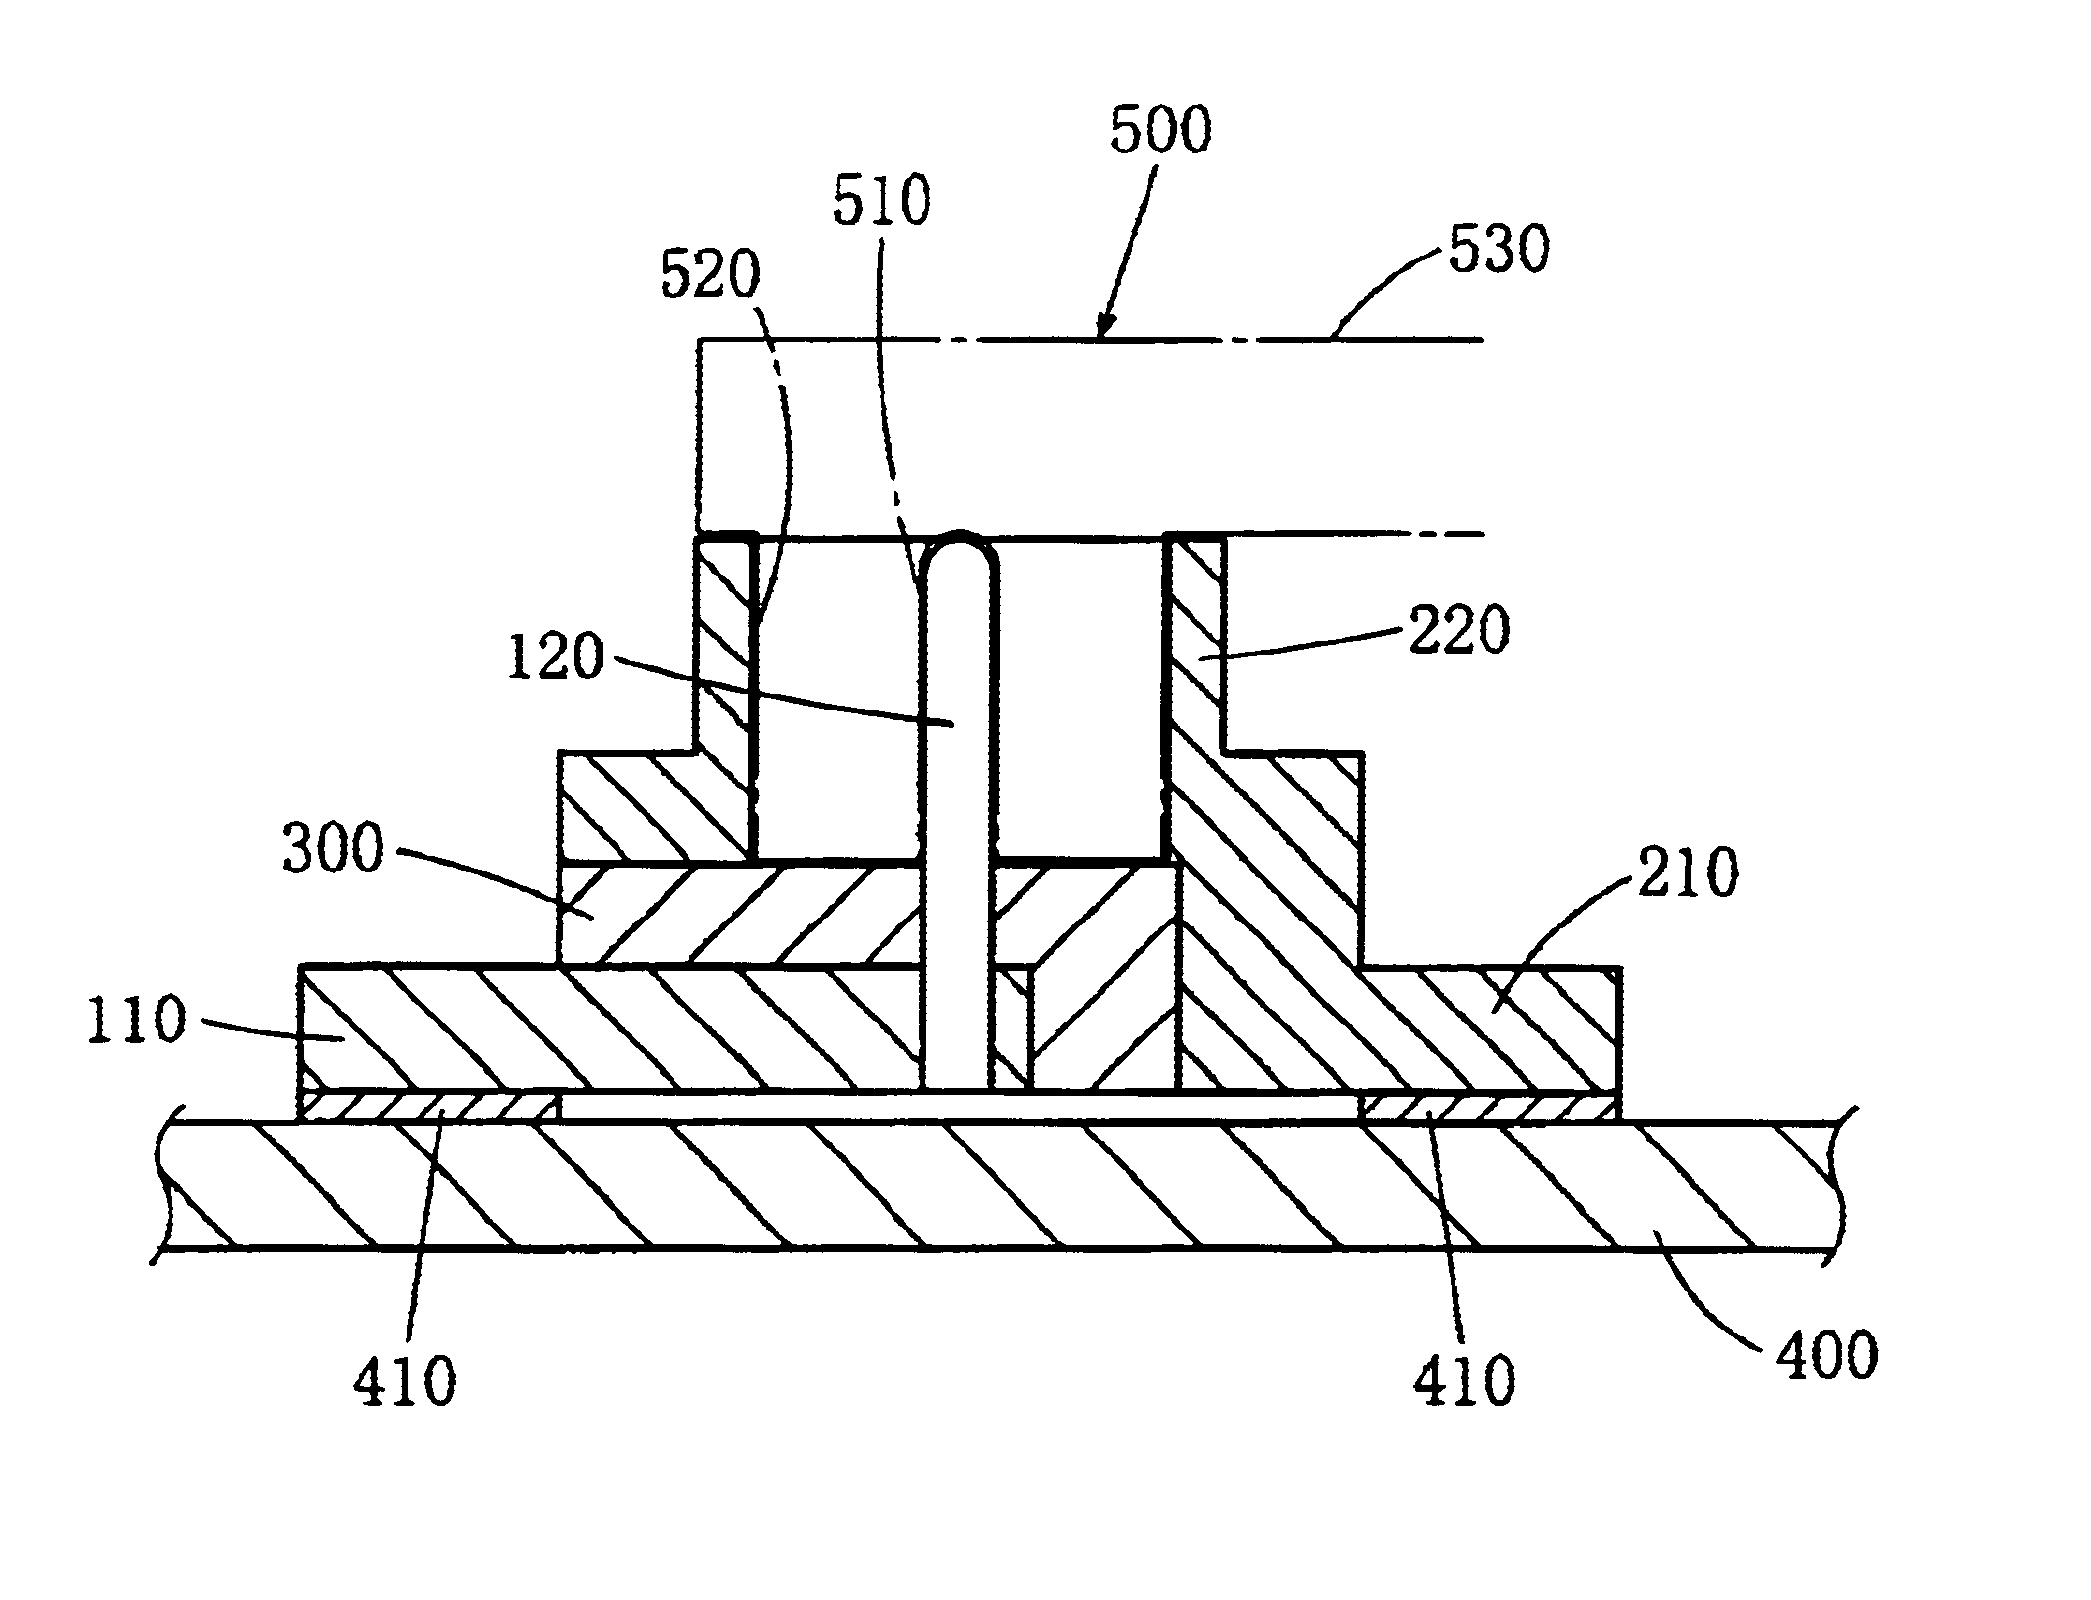 Electric contact and an electric connector both using resin solder and a method of connecting them to a printed circuit board